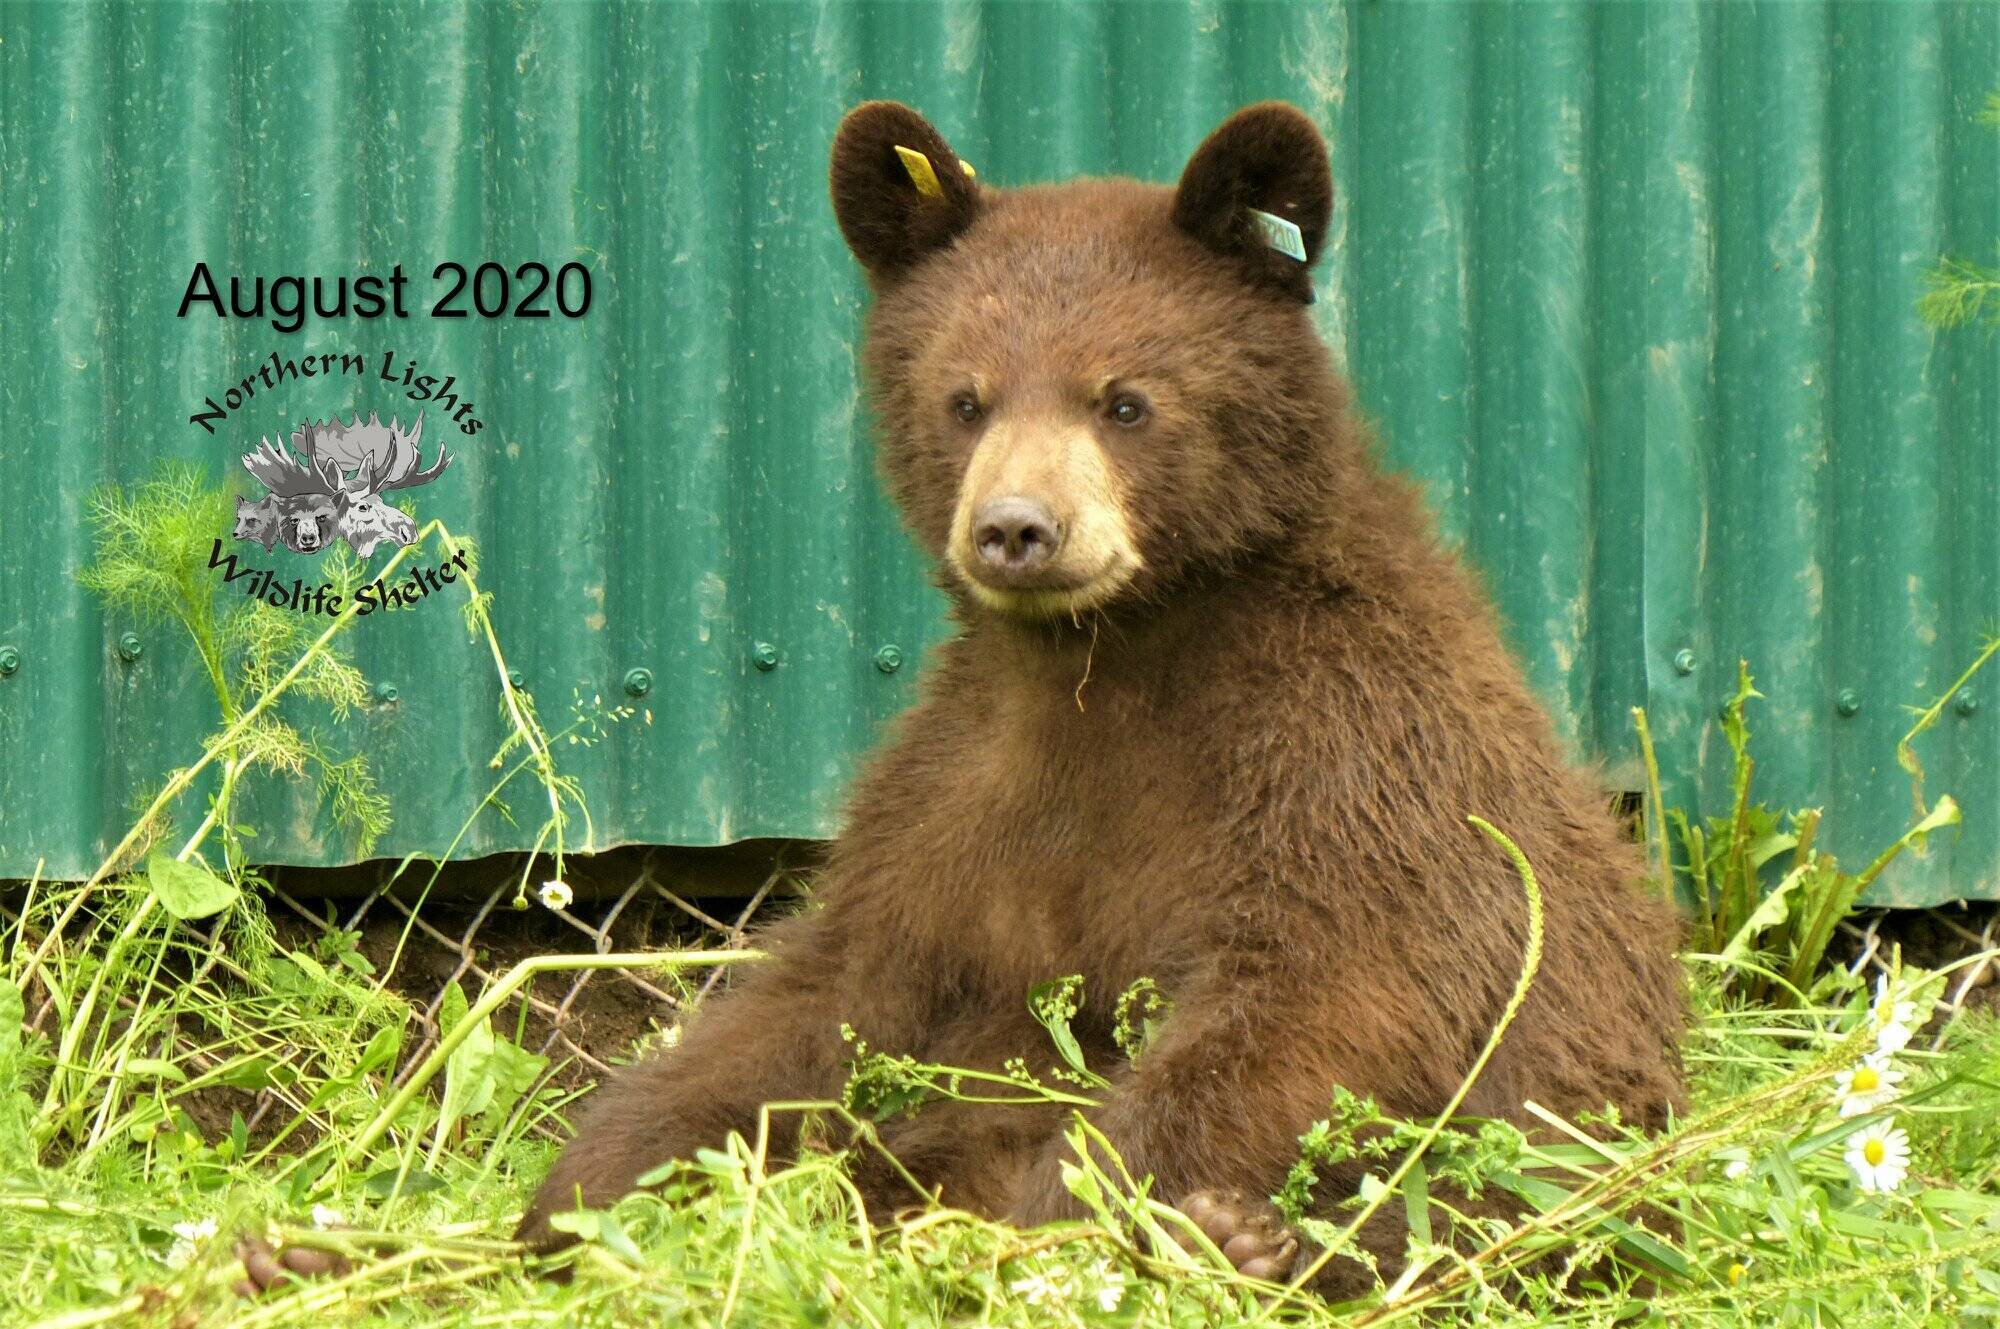 A bear cub named Rock came into the Northern Lights Wildlife Shelter in the summer of 2020 after police found it in a cage in a home. He spent a year with the shelter before being release healthy. Justin Thibault has now been sentenced for unlawful possession of live wildlife in provincial court on March 3, 2023. (Photo from NLWS Facebook page)